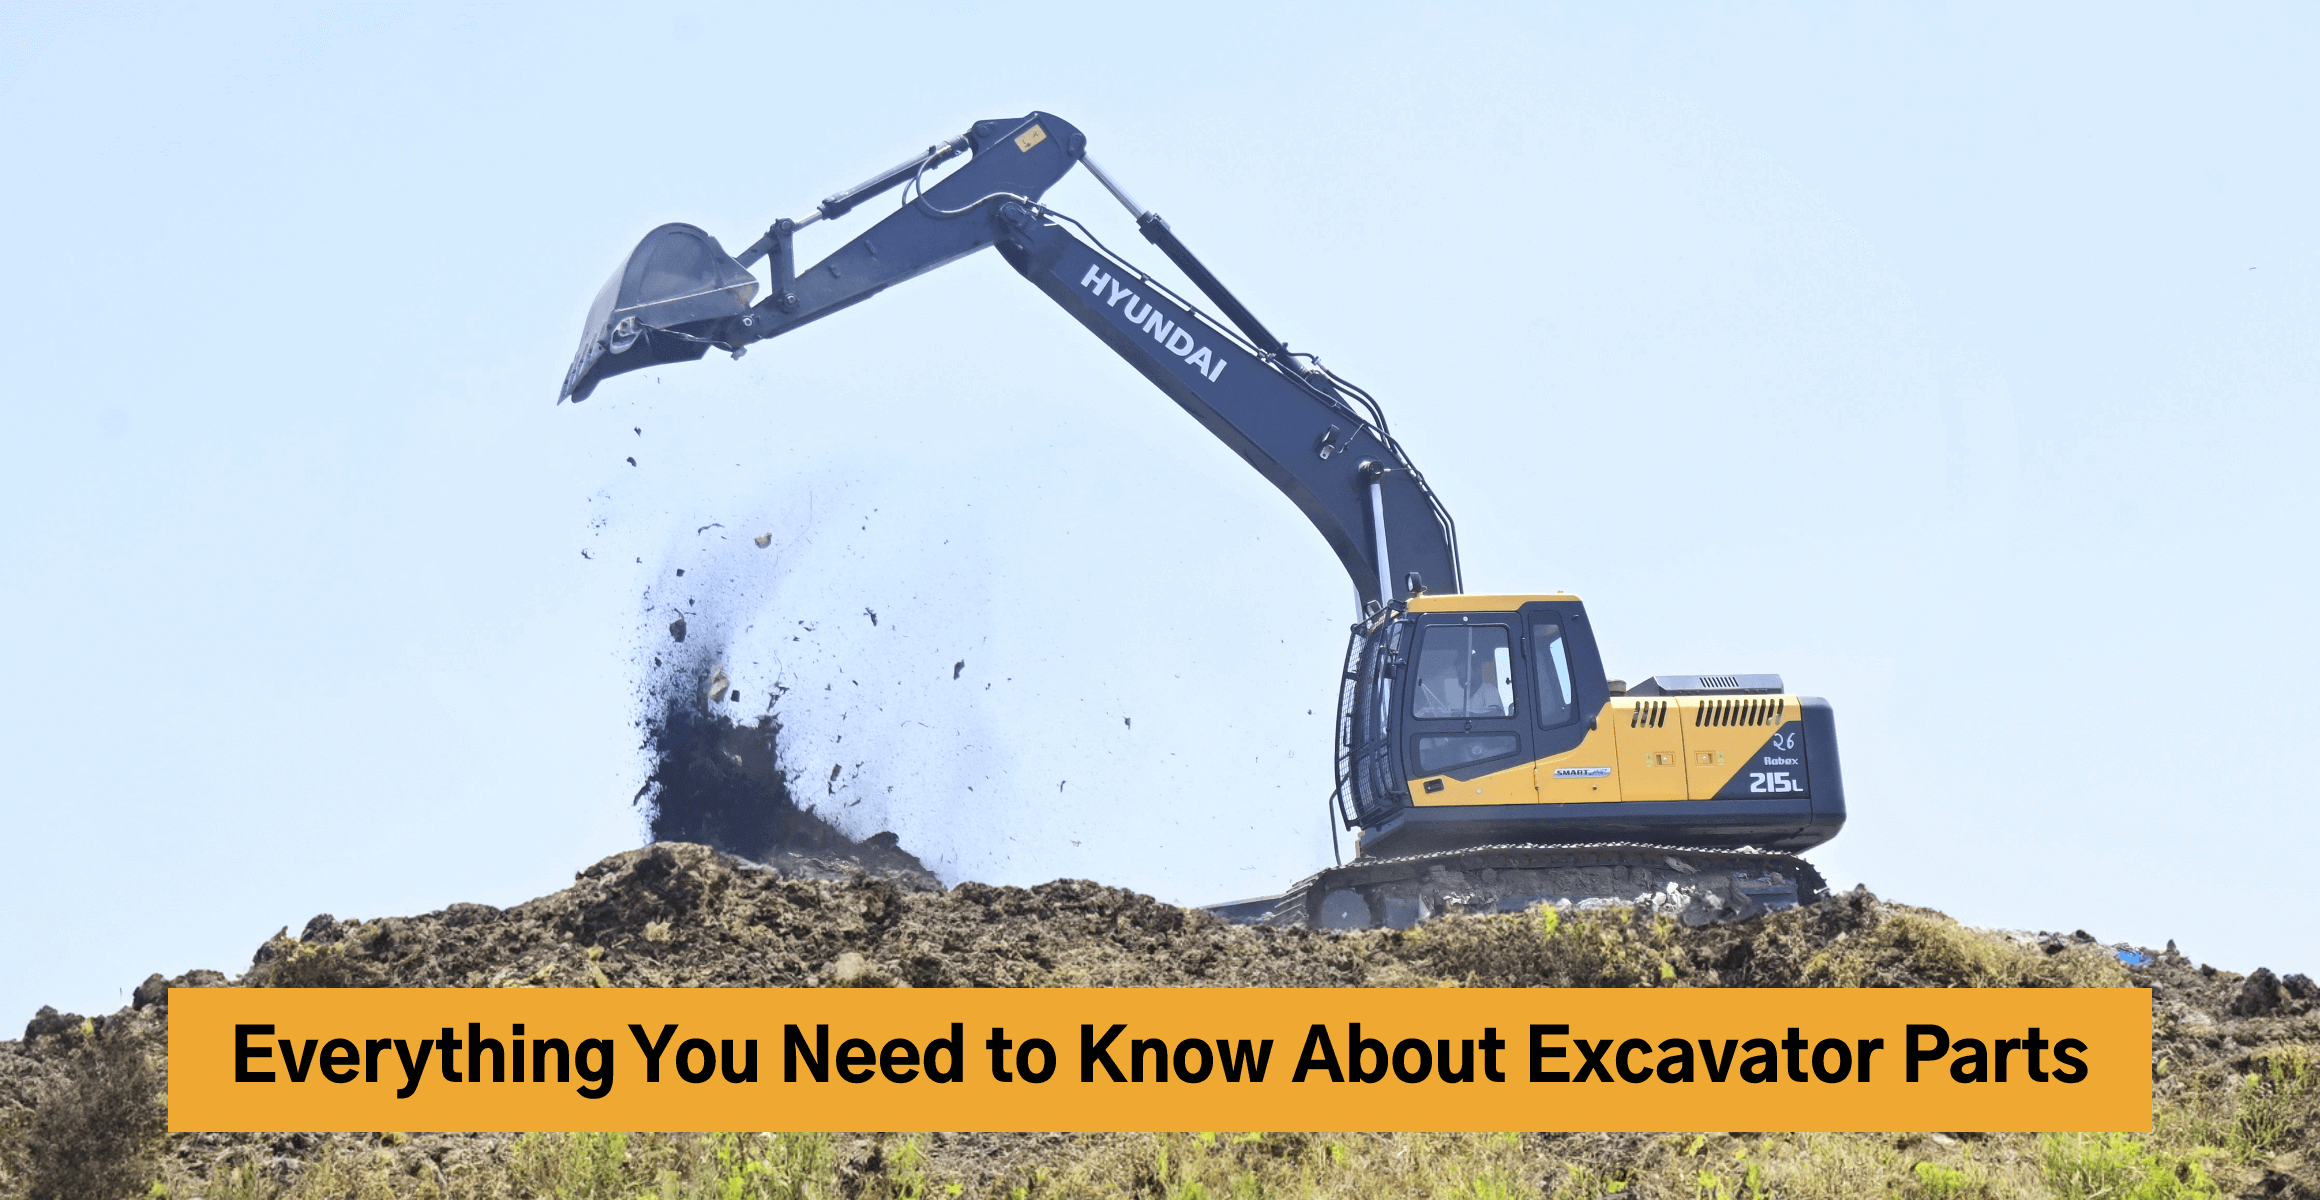 Everything You Need to Know About Excavator Parts